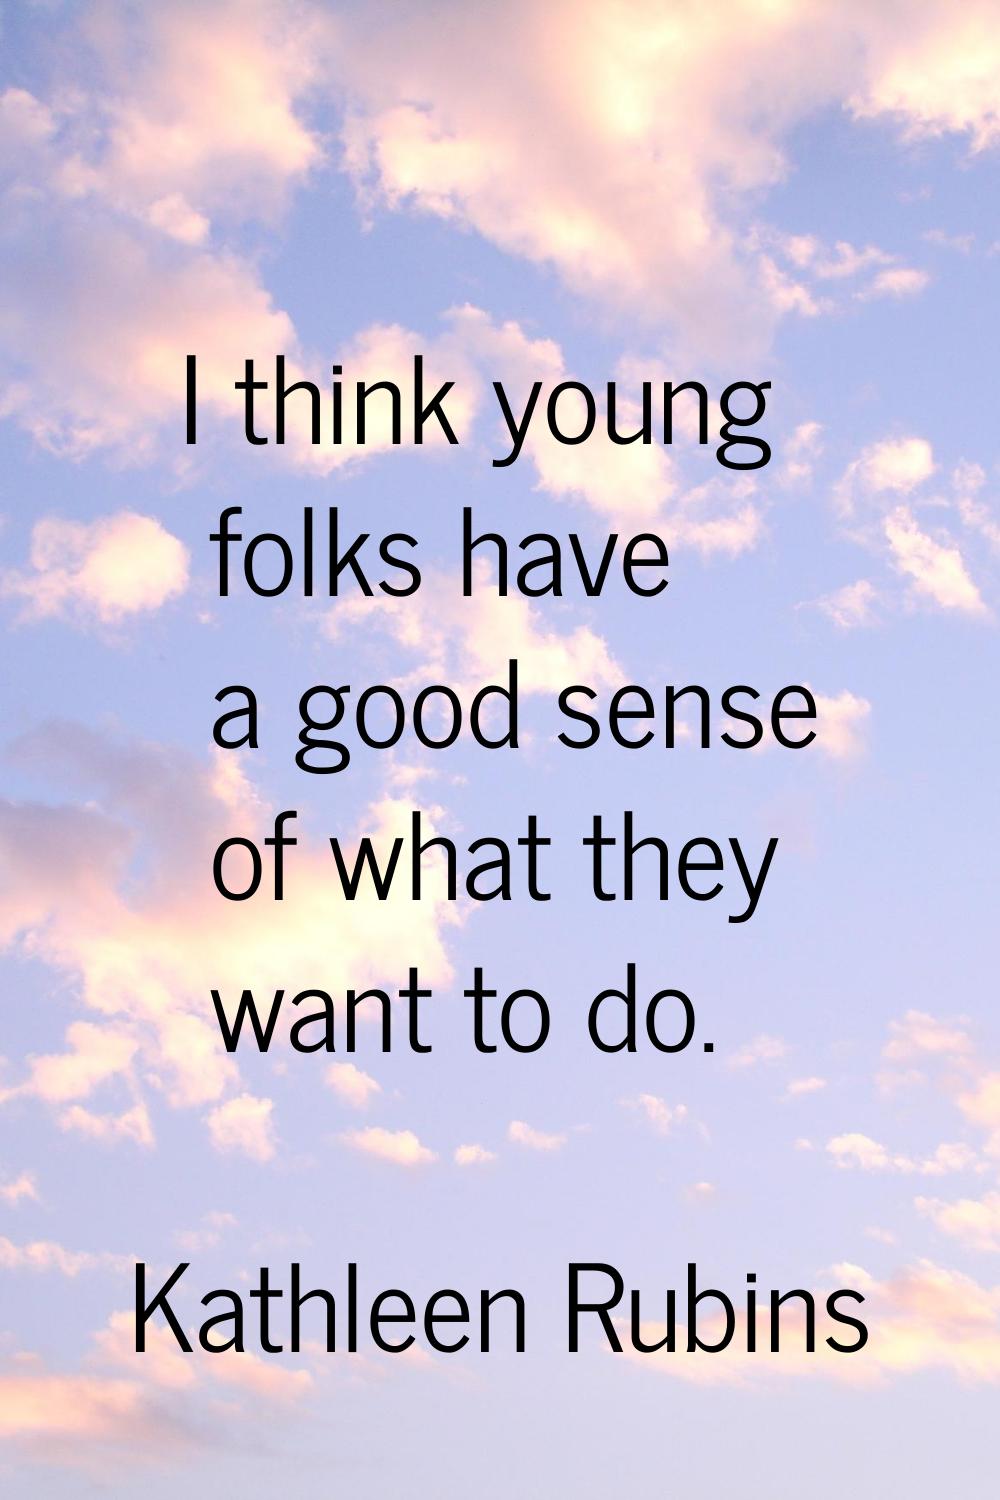 I think young folks have a good sense of what they want to do.